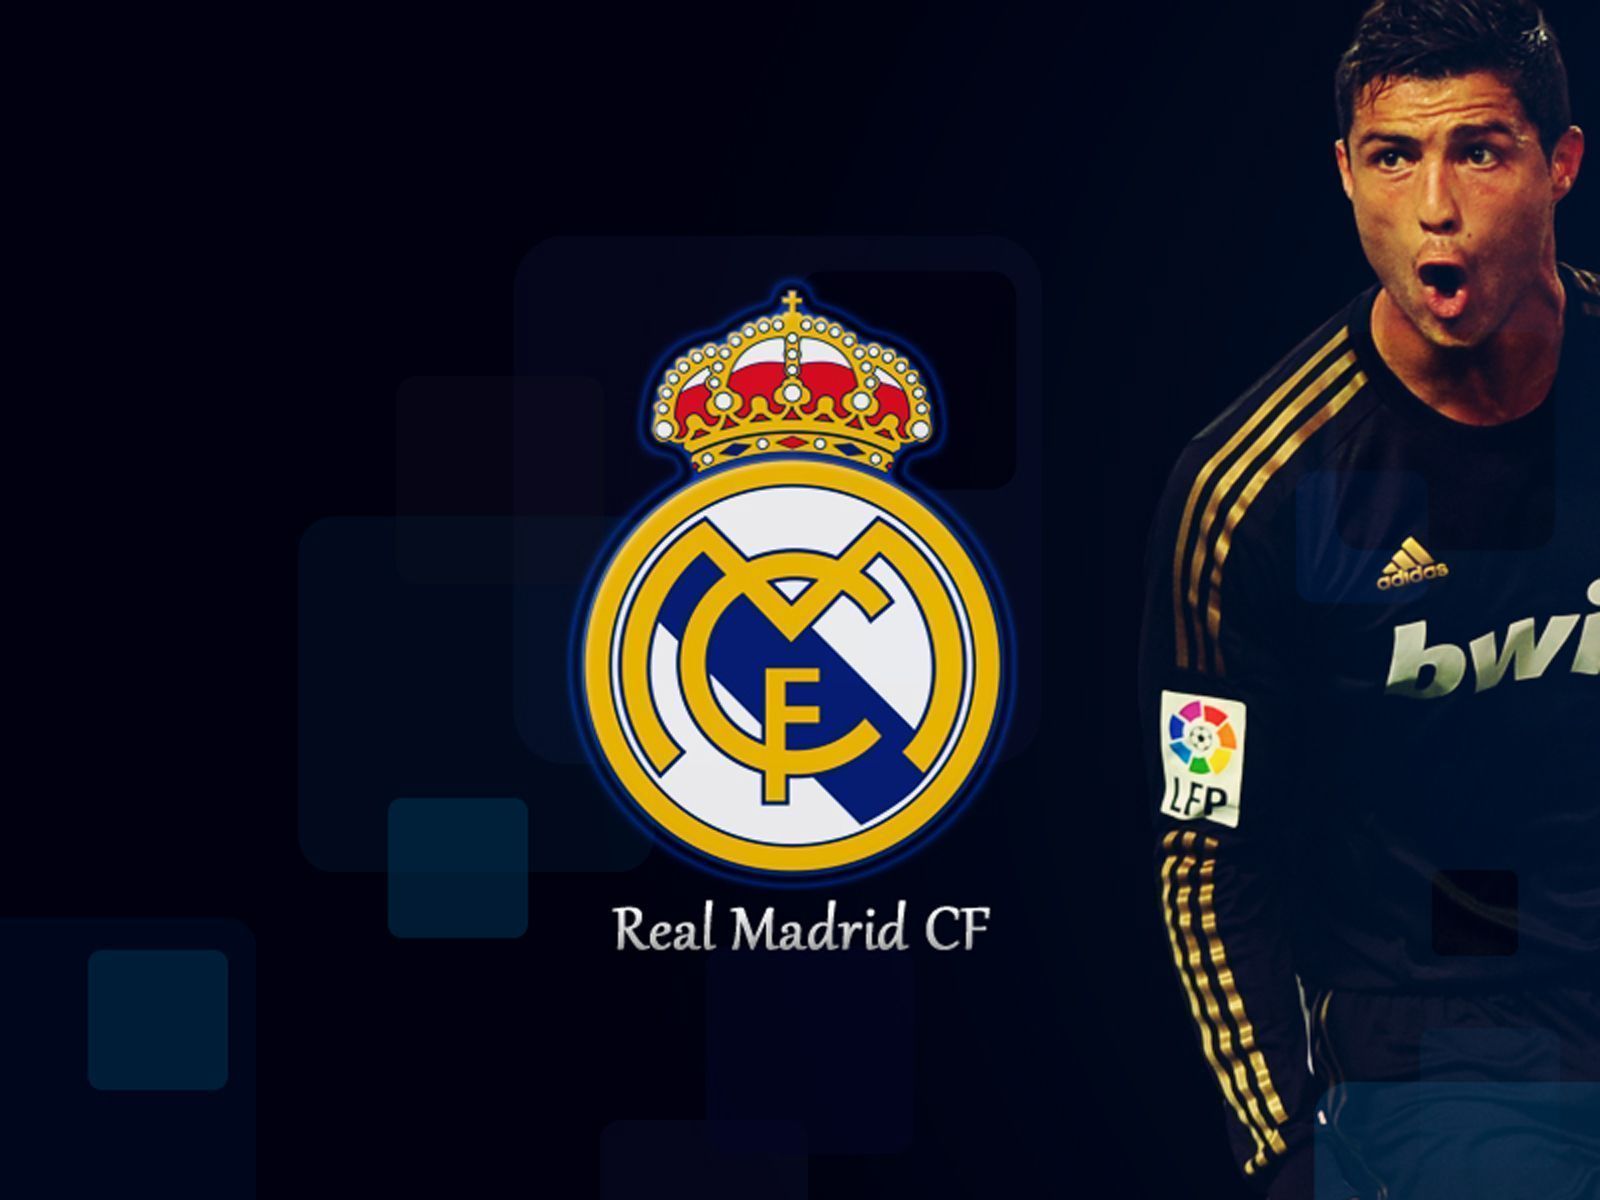 FC Real Madrid Wallpapers - Manualwall.com